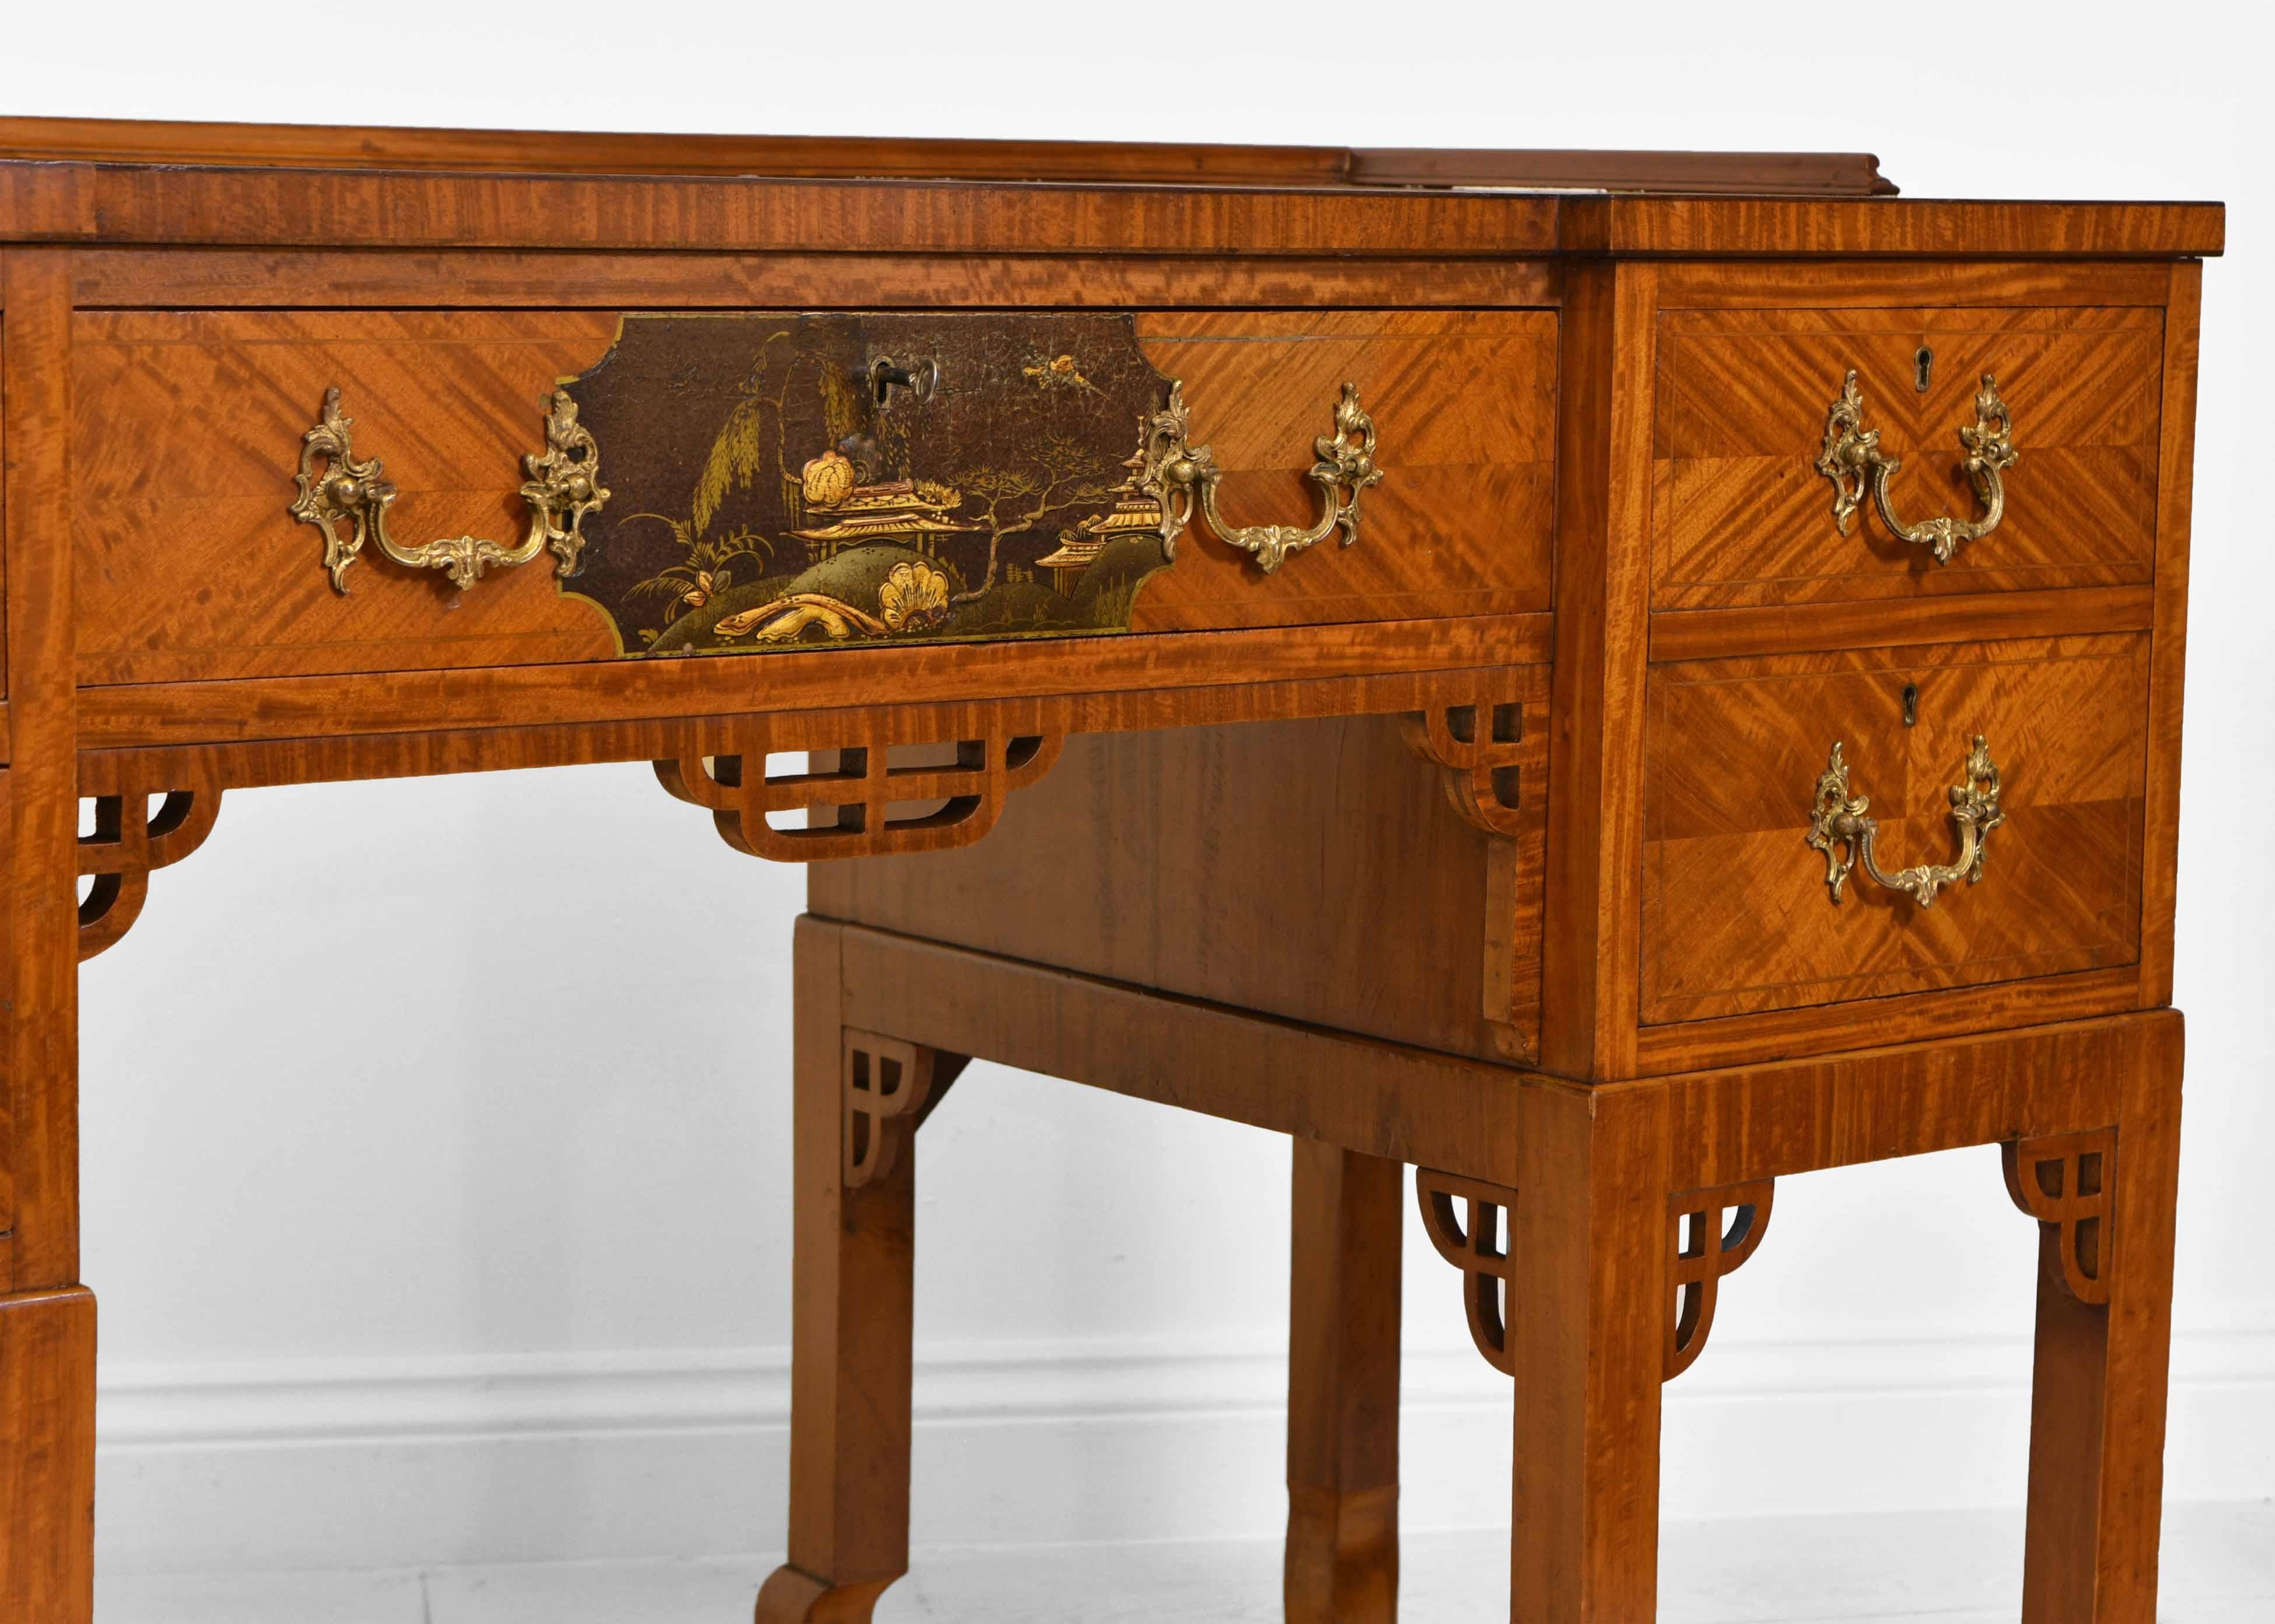 20th Century Antique English Satinwood Desk in the Japanese Manner circa 1900 For Sale